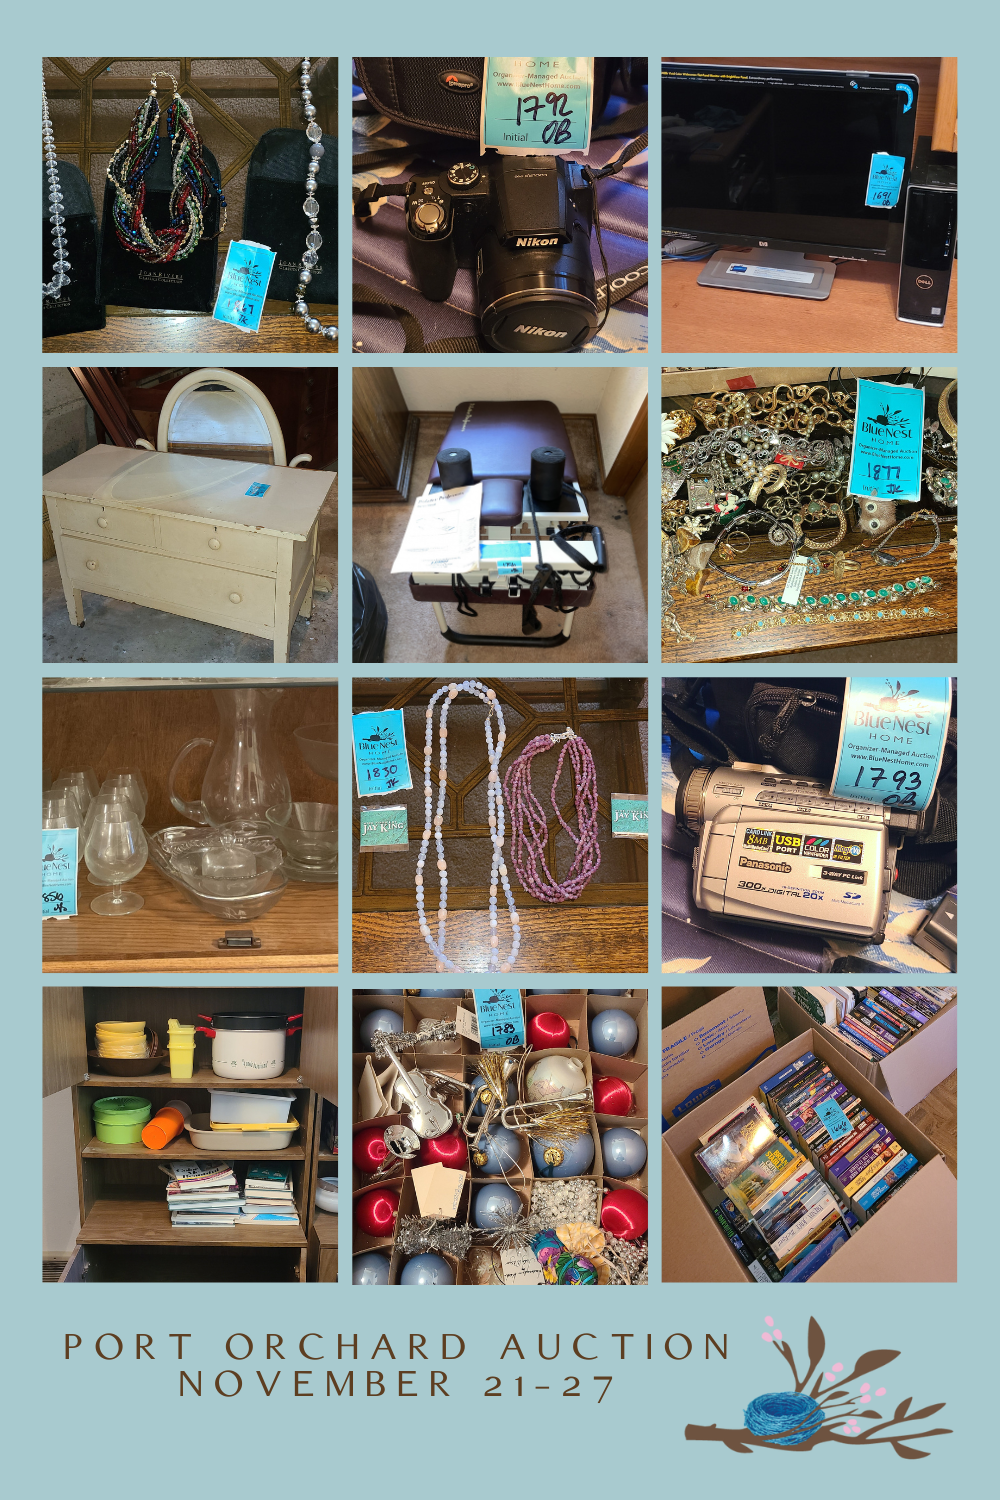 Port Orchard Jewelry and house goods online auction collage of items for sale.